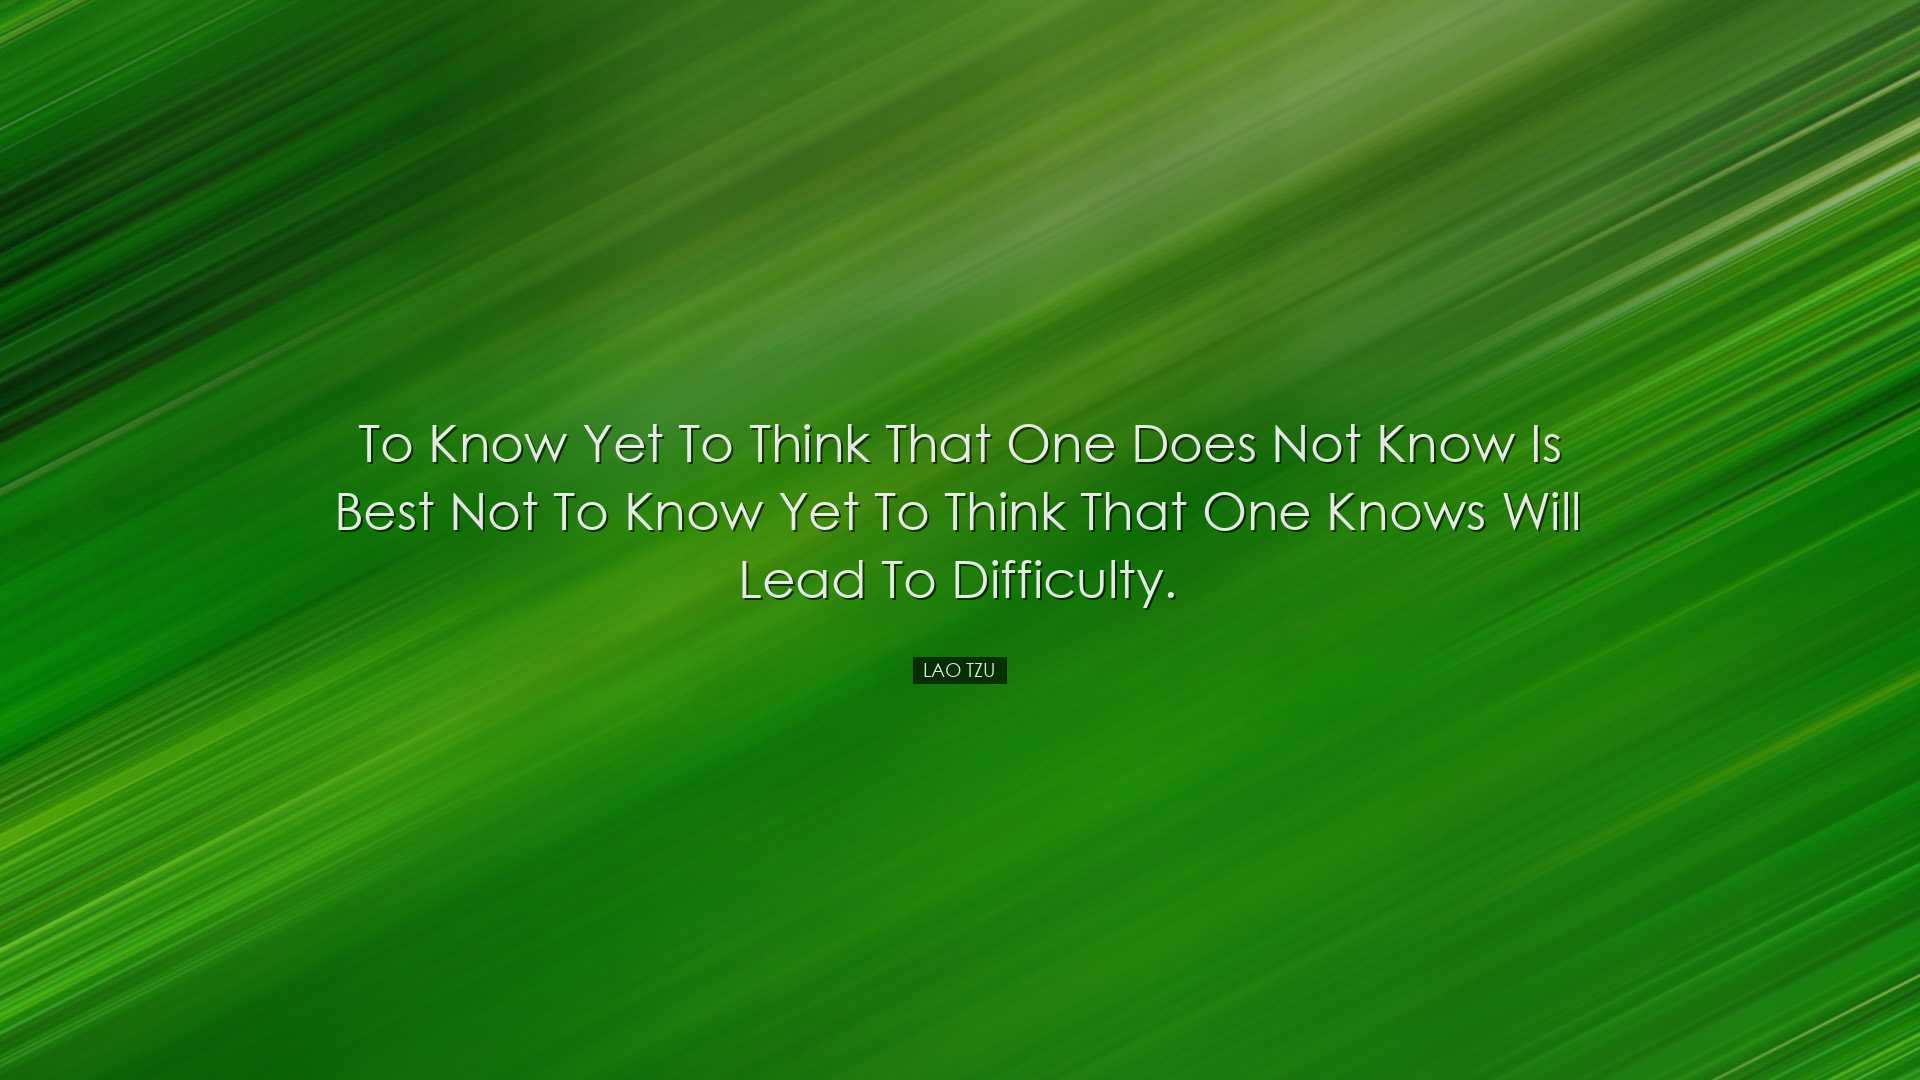 To know yet to think that one does not know is best Not to know ye